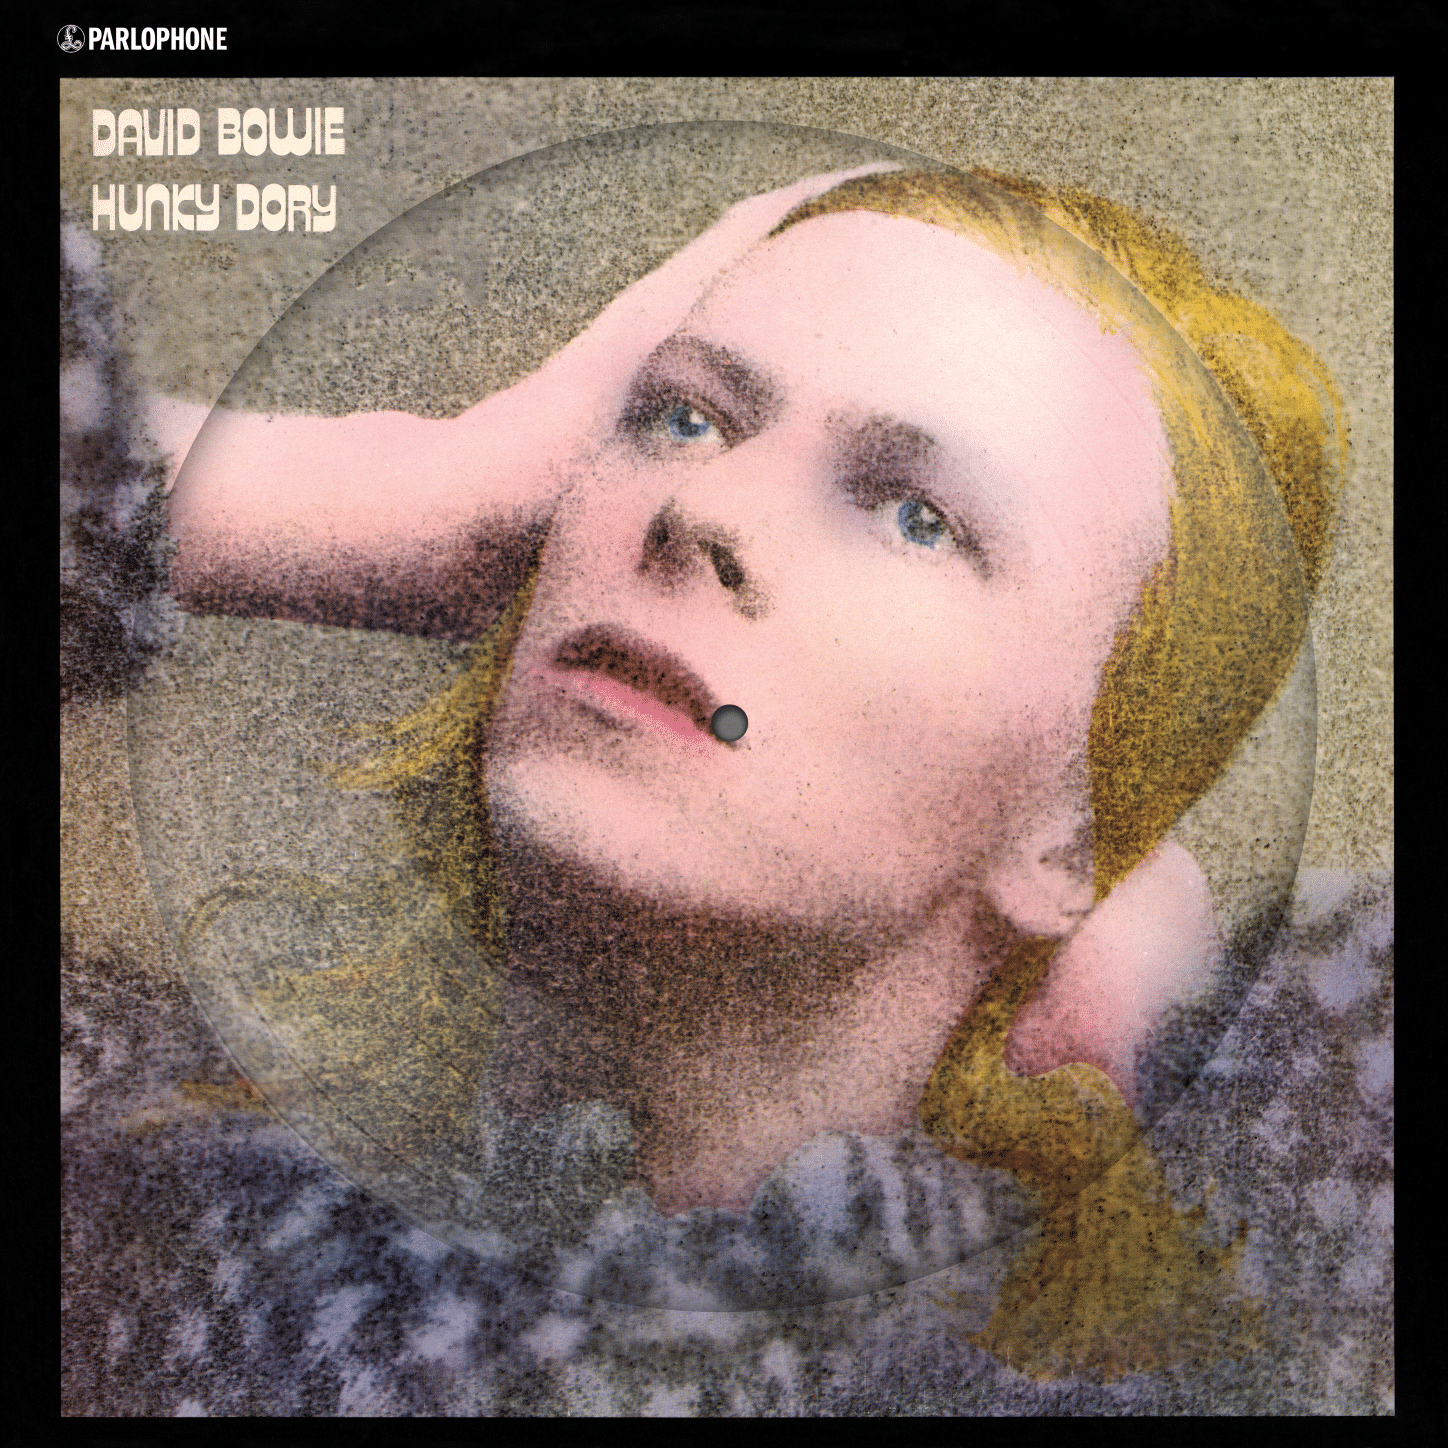 DAVID BOWIE - HUNKY DORY (50TH ANNIVERSARY PICTURE DISK)